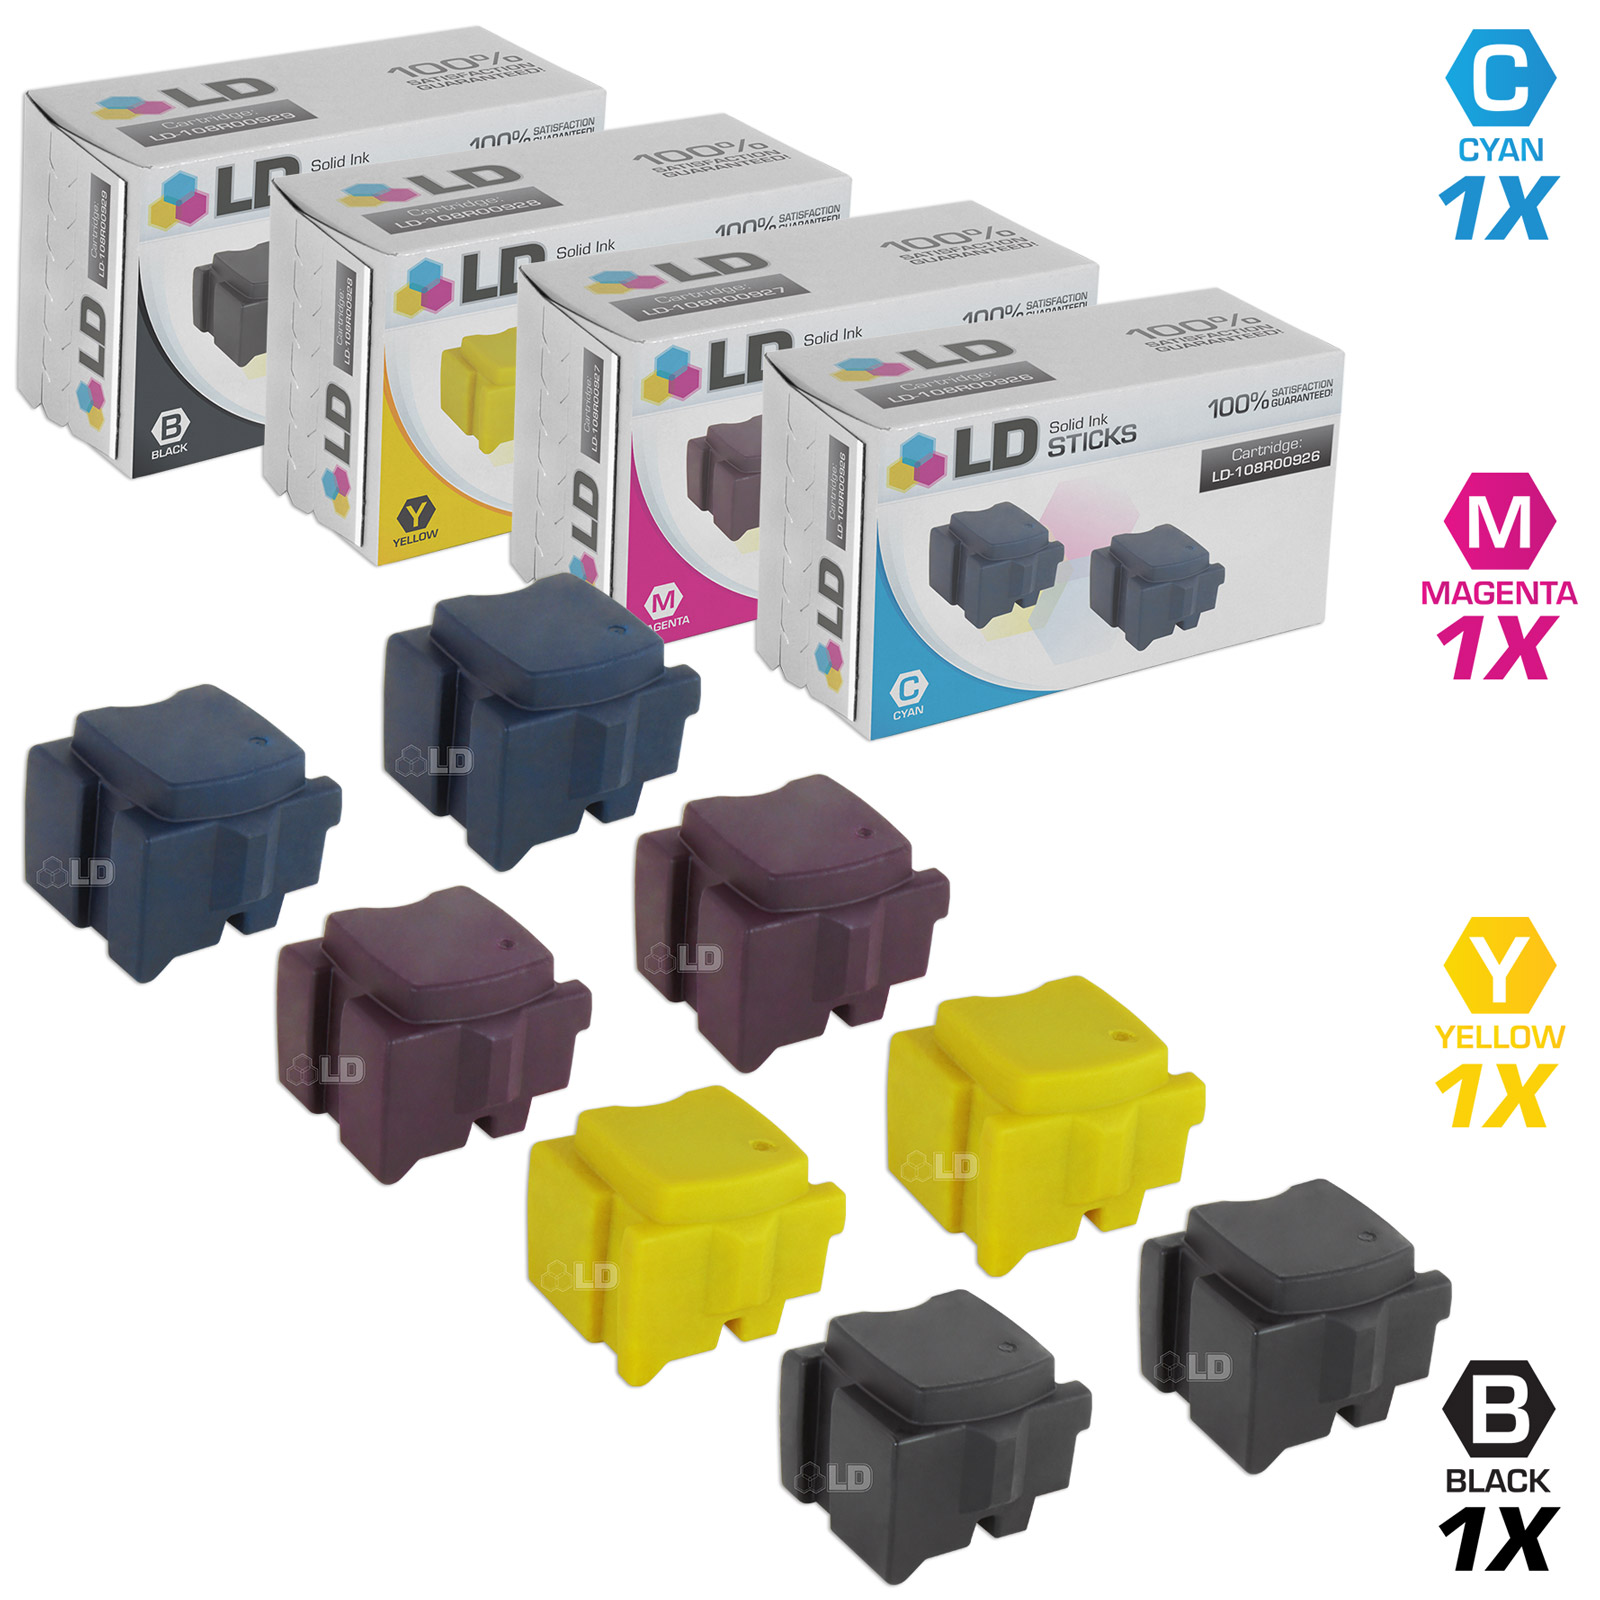 LD Compatible Replacements for Xerox 8PK Sticks Includes:2 108R00929 Black, 2 108R00926 Cyan, 2 108R00927 Magenta, & 2 108R00928 Yellow for use in Xerox ColorQube 8570DN, 8570DT, & 8570N - image 1 of 6